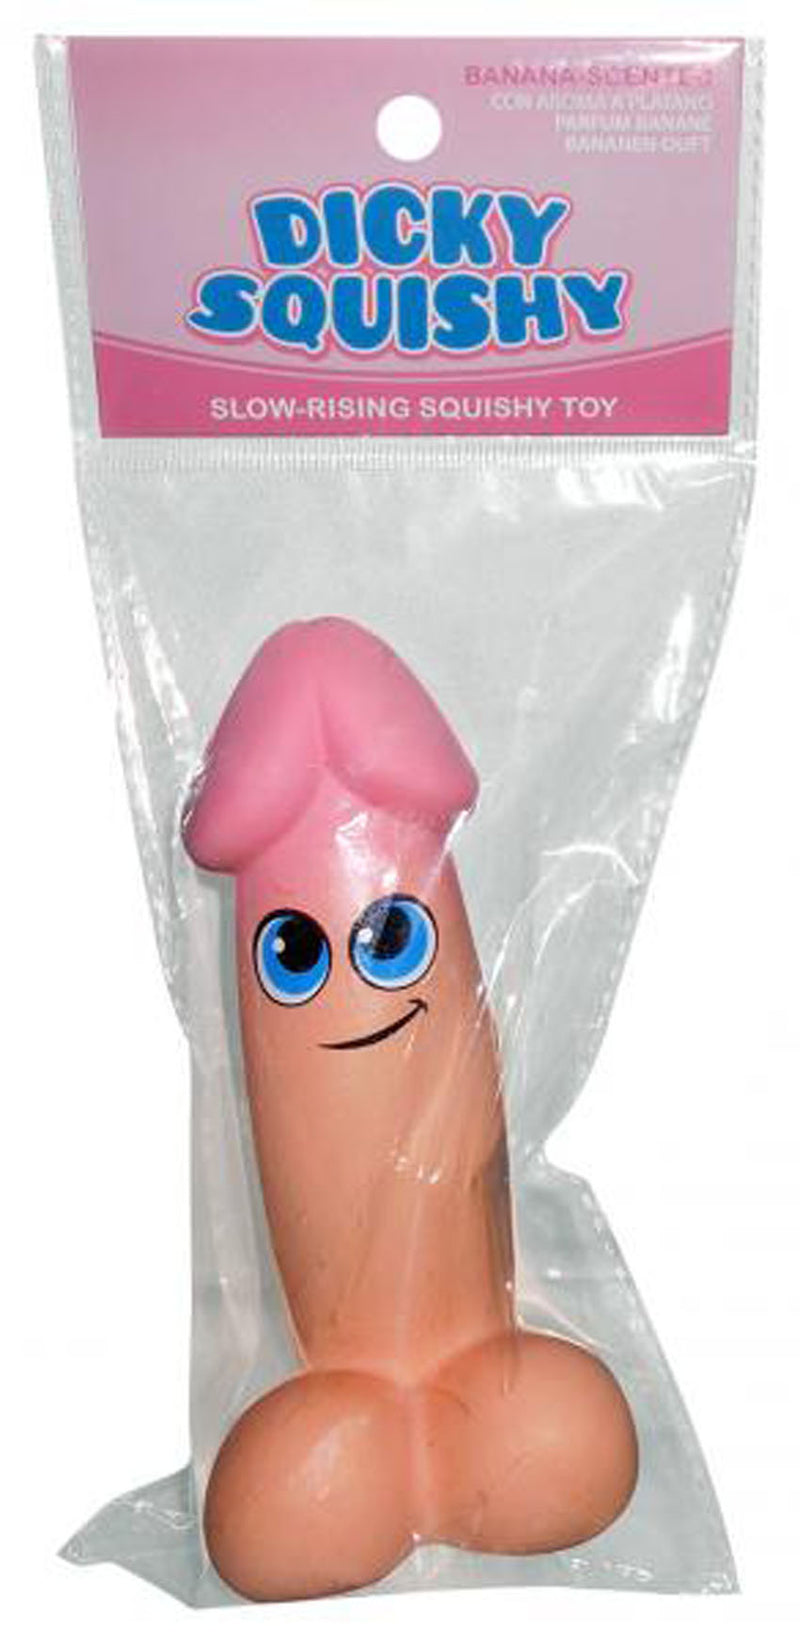 Banana-Scented Slow Rising Dick Squishy Toy for Stress Relief and Fun - 5.5" Tall!